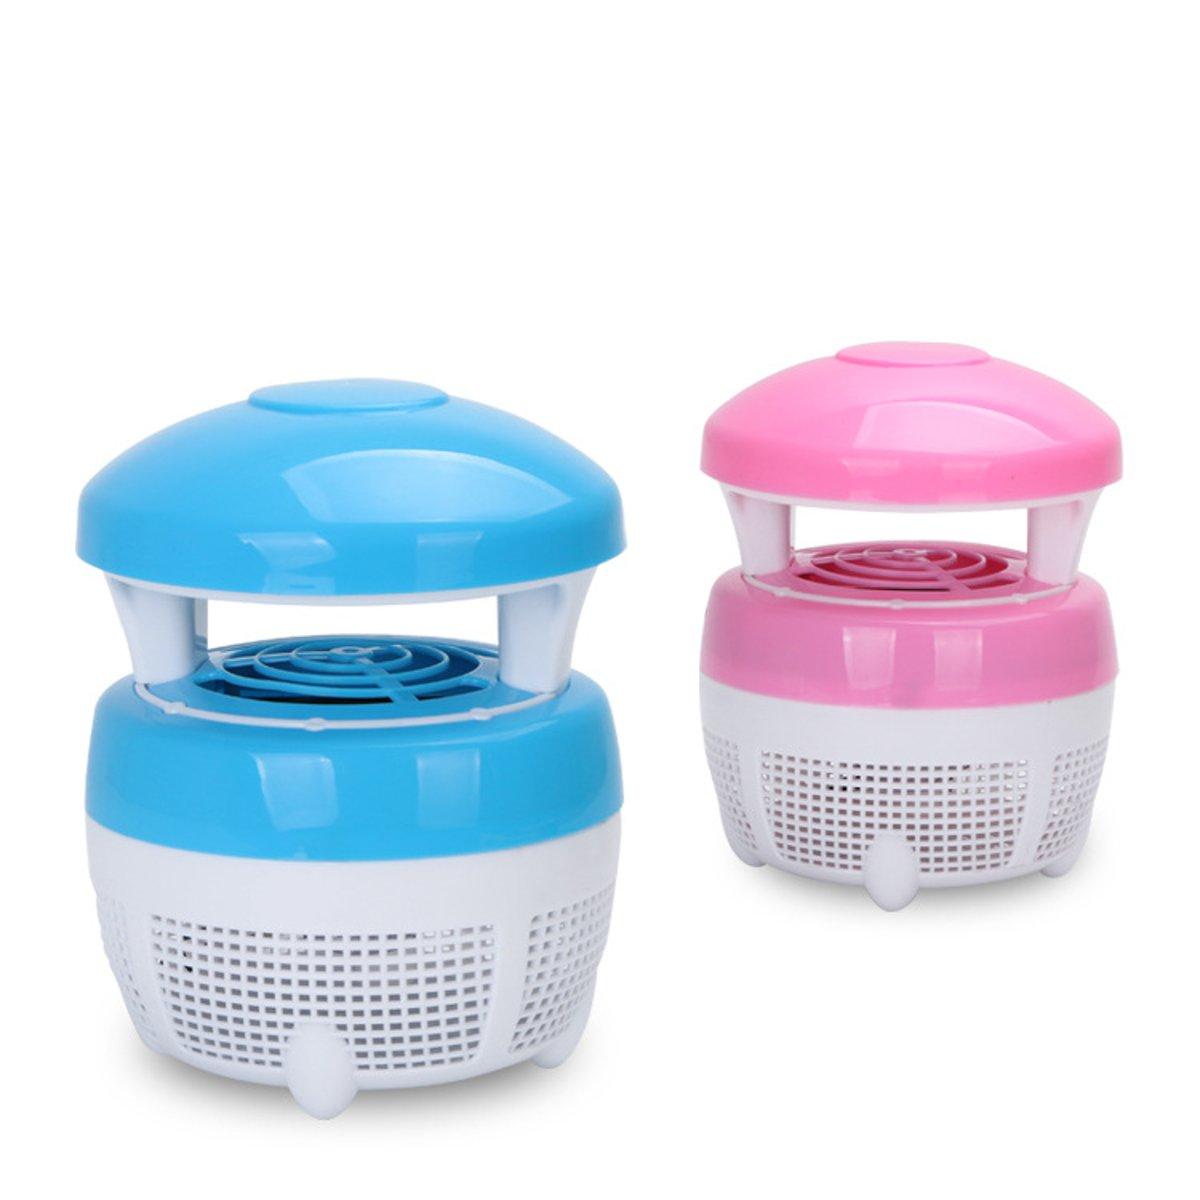 5W LED USB Mosquito Dispeller Repeller Mosquito Killer Lamp Bulb Electric Bug Insect Zapper Pest Trap Light